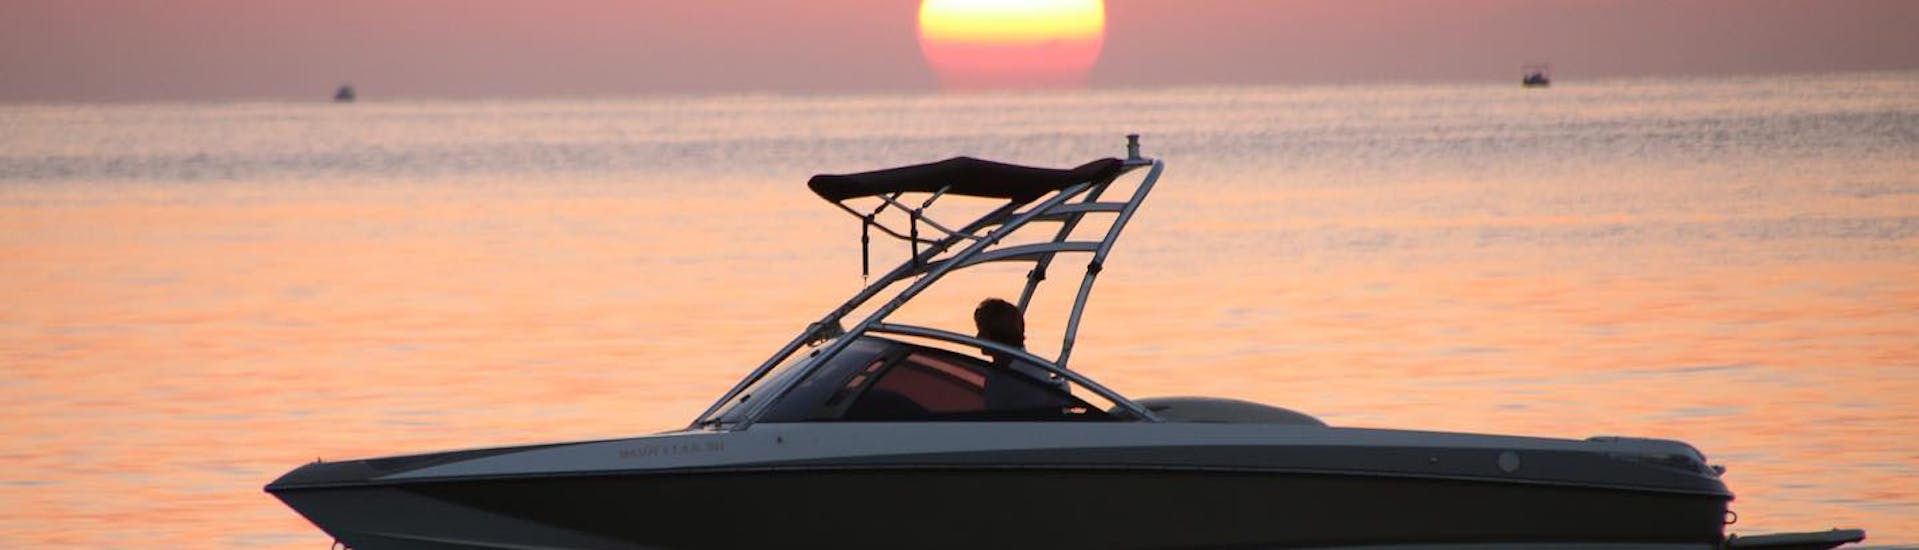 The boat under the sunset during the Private Boat Trip along Mirabello Bay from Ammoudi with Amoudi Watersports.